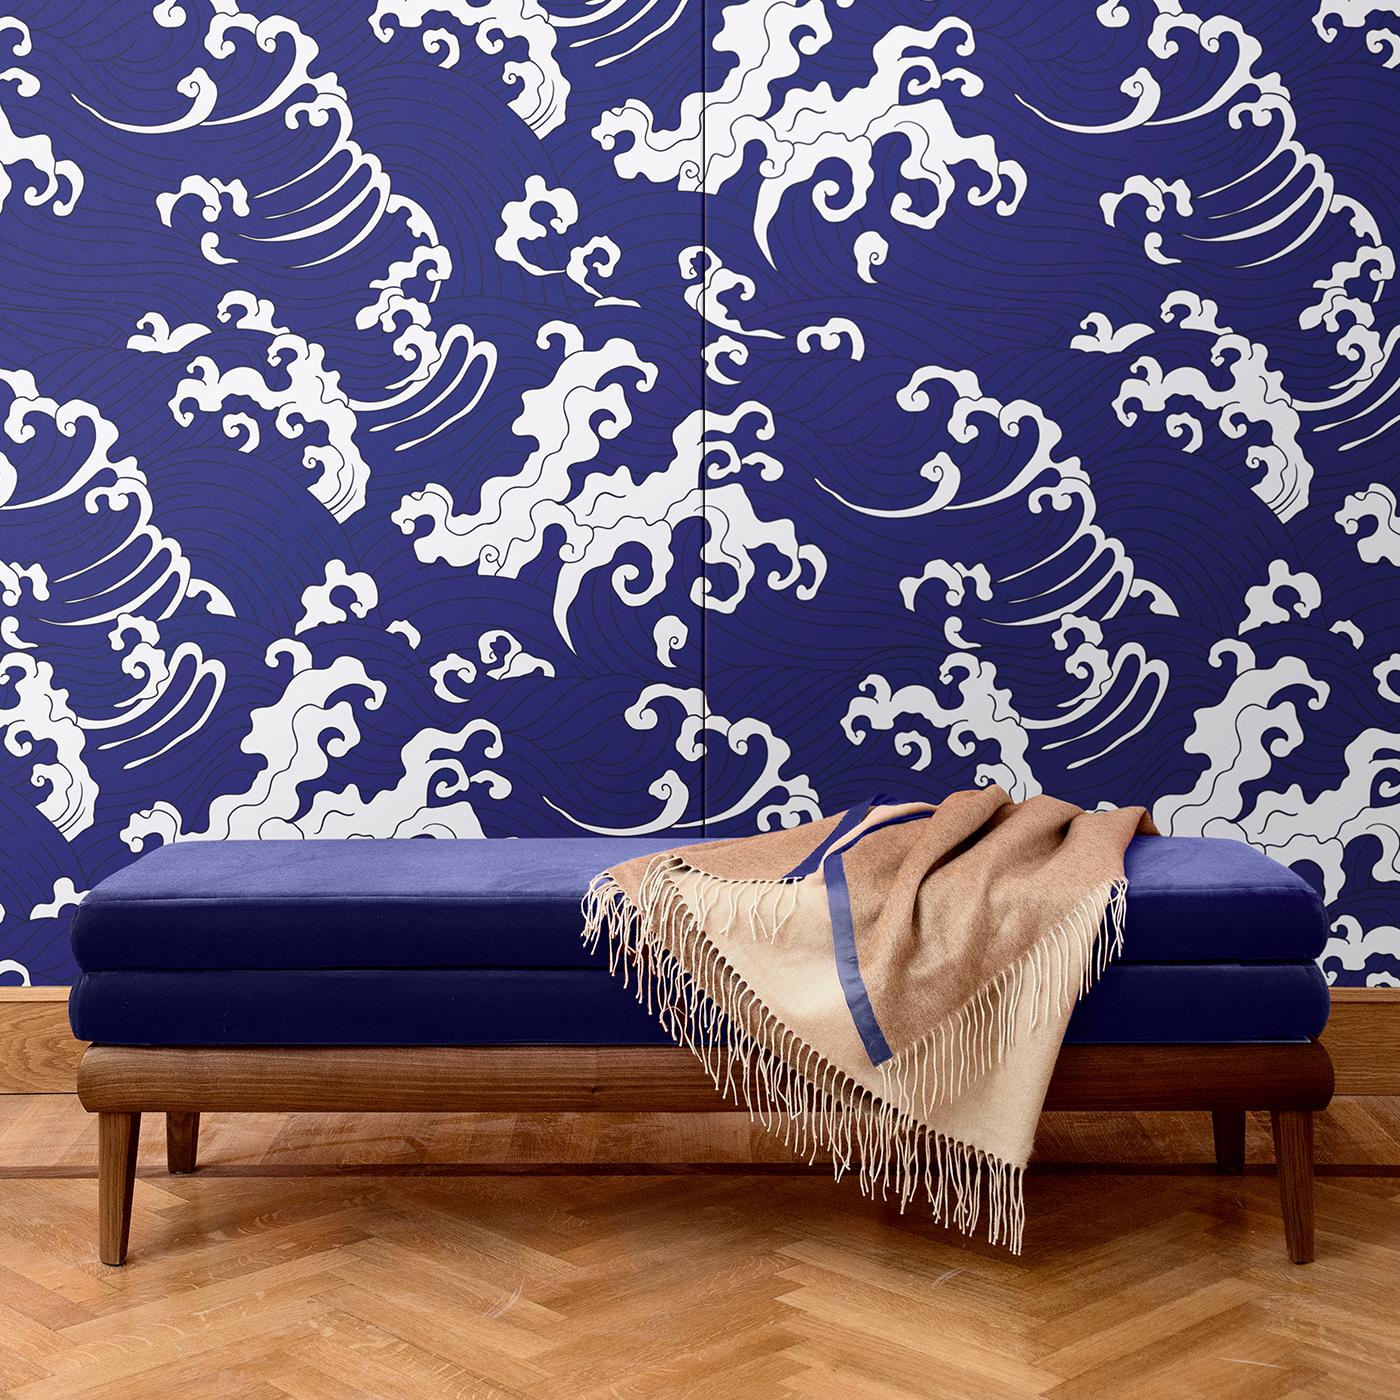 Purple and white are the hues of this wall covering, whose dynamic and sophisticated design is inspired by traditional Japanese art. Depicting a tempestuous sea with curved punctuated by white foam, this dramatic decoration can be used to adorn an